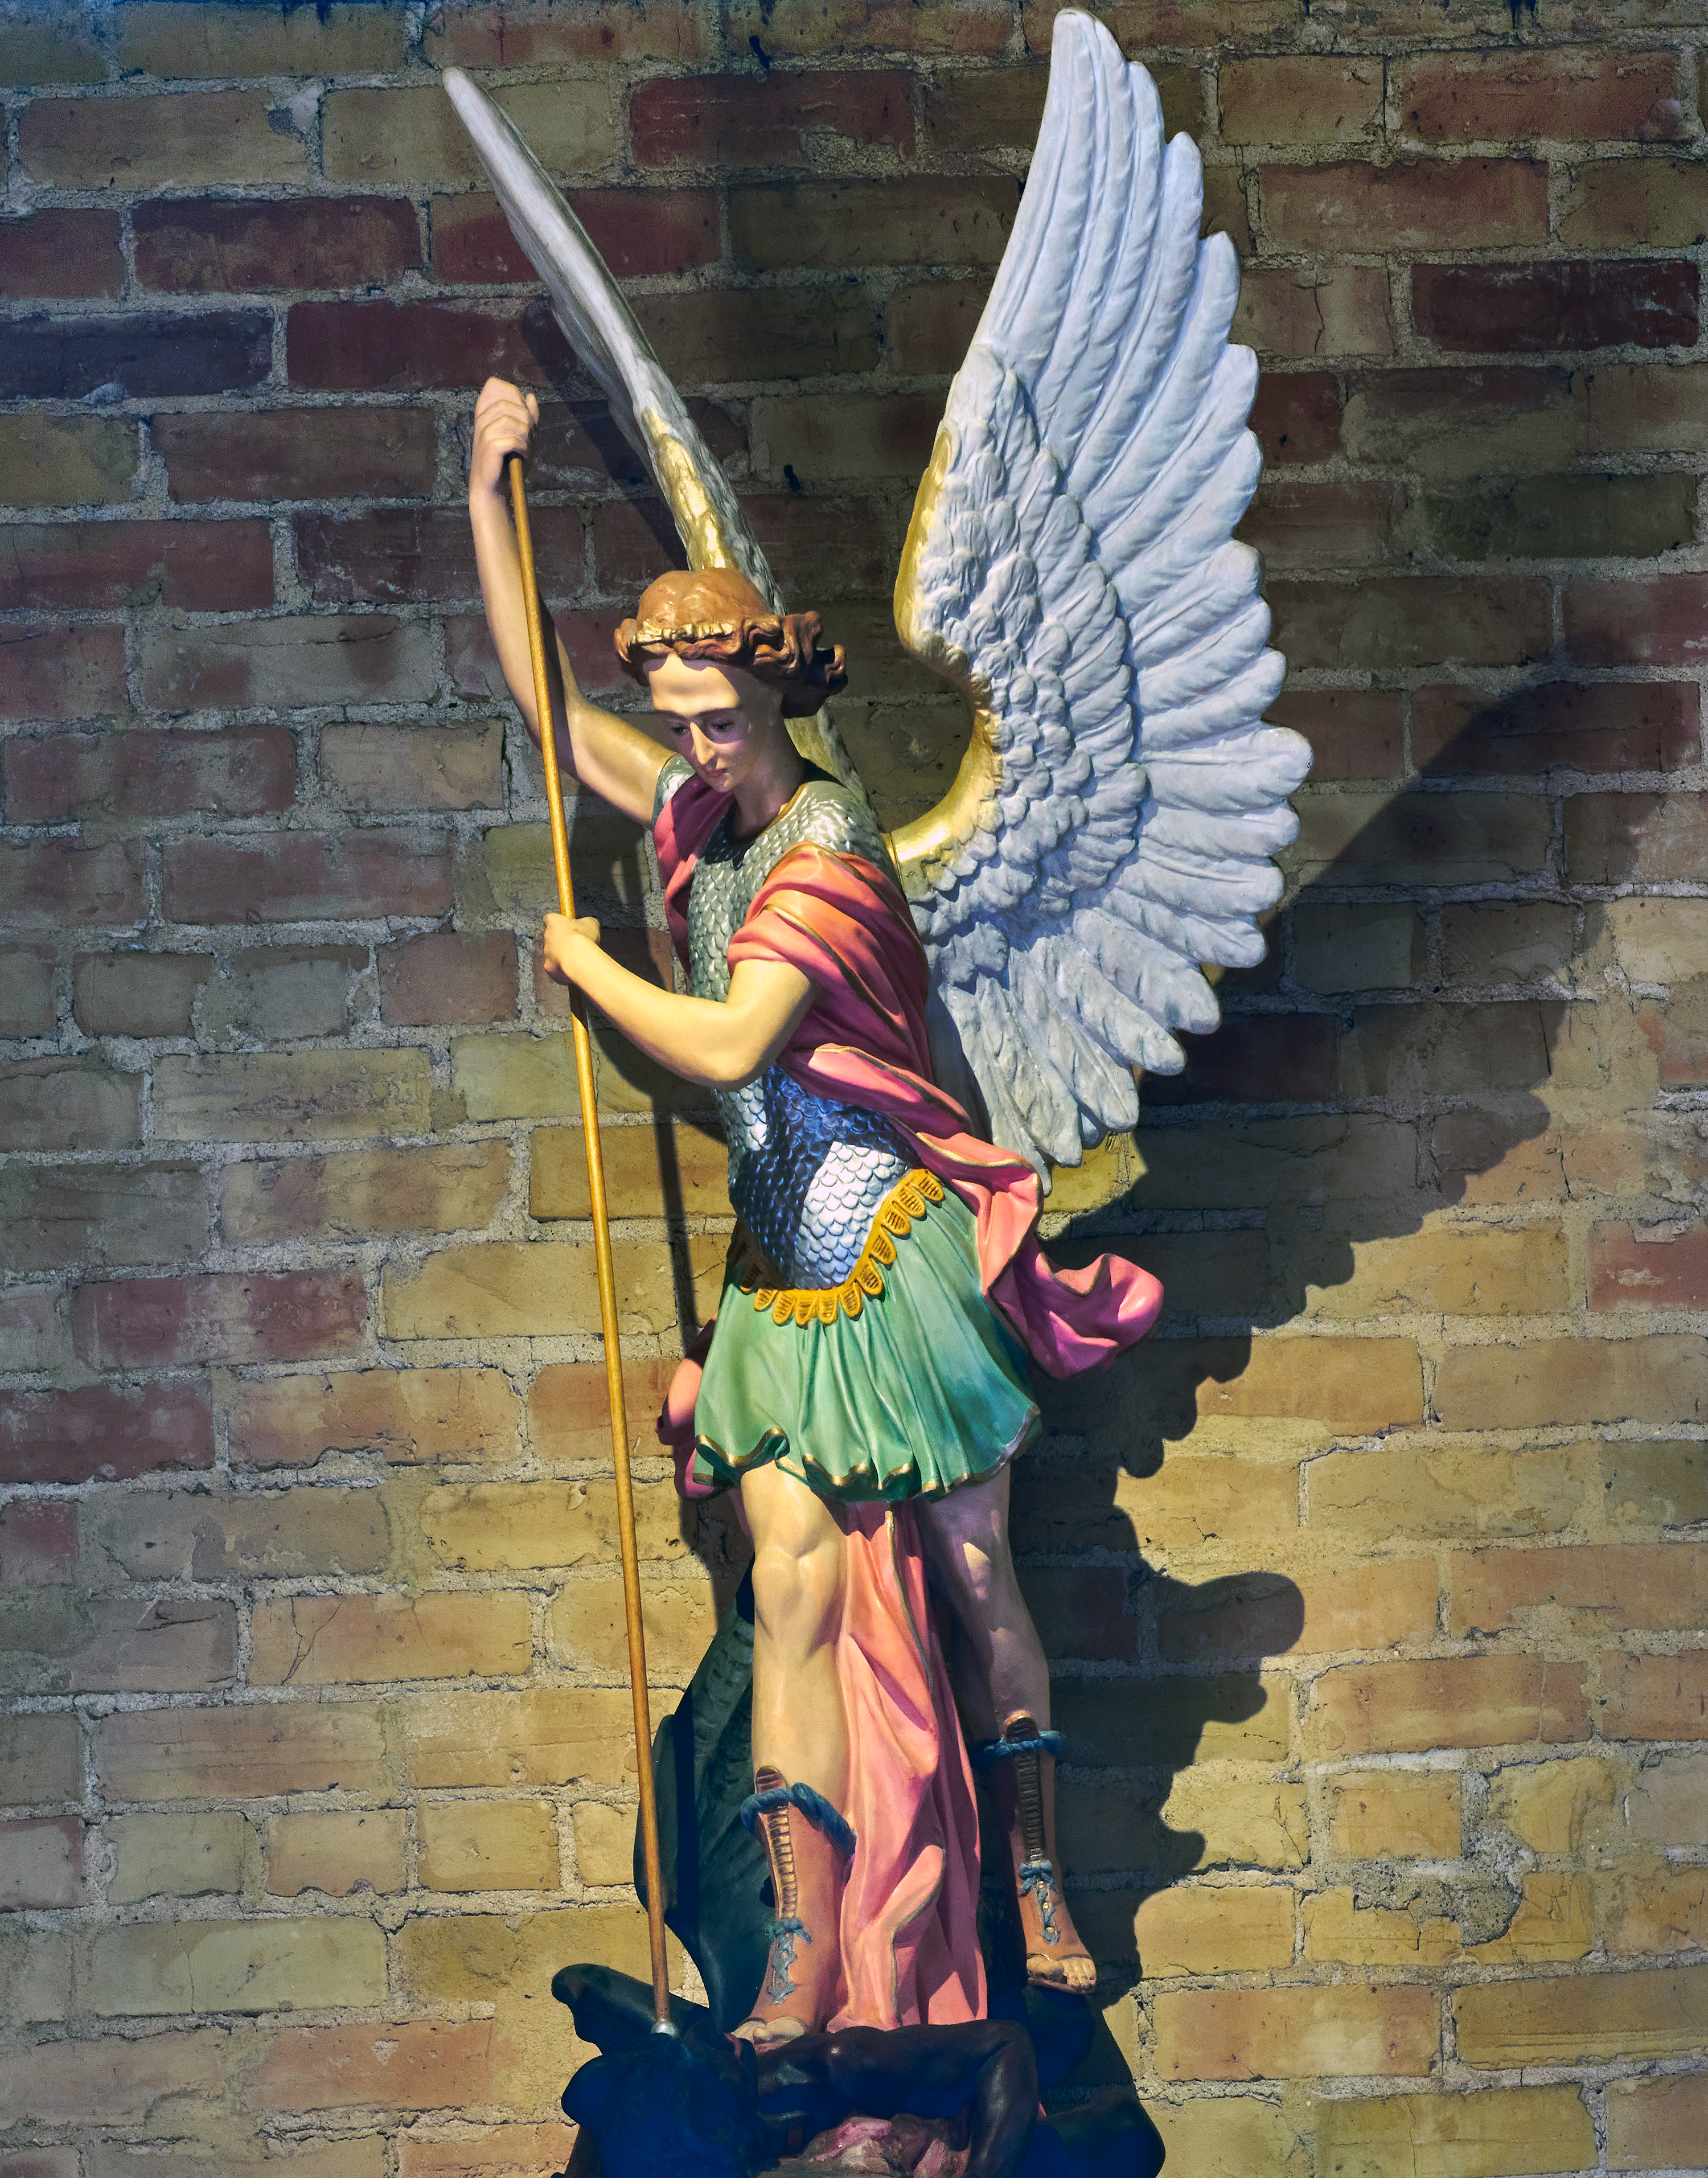 Saint Michael the Archangel Statue, adapted from loc.gov image with credit to Highsmith, Carol M.